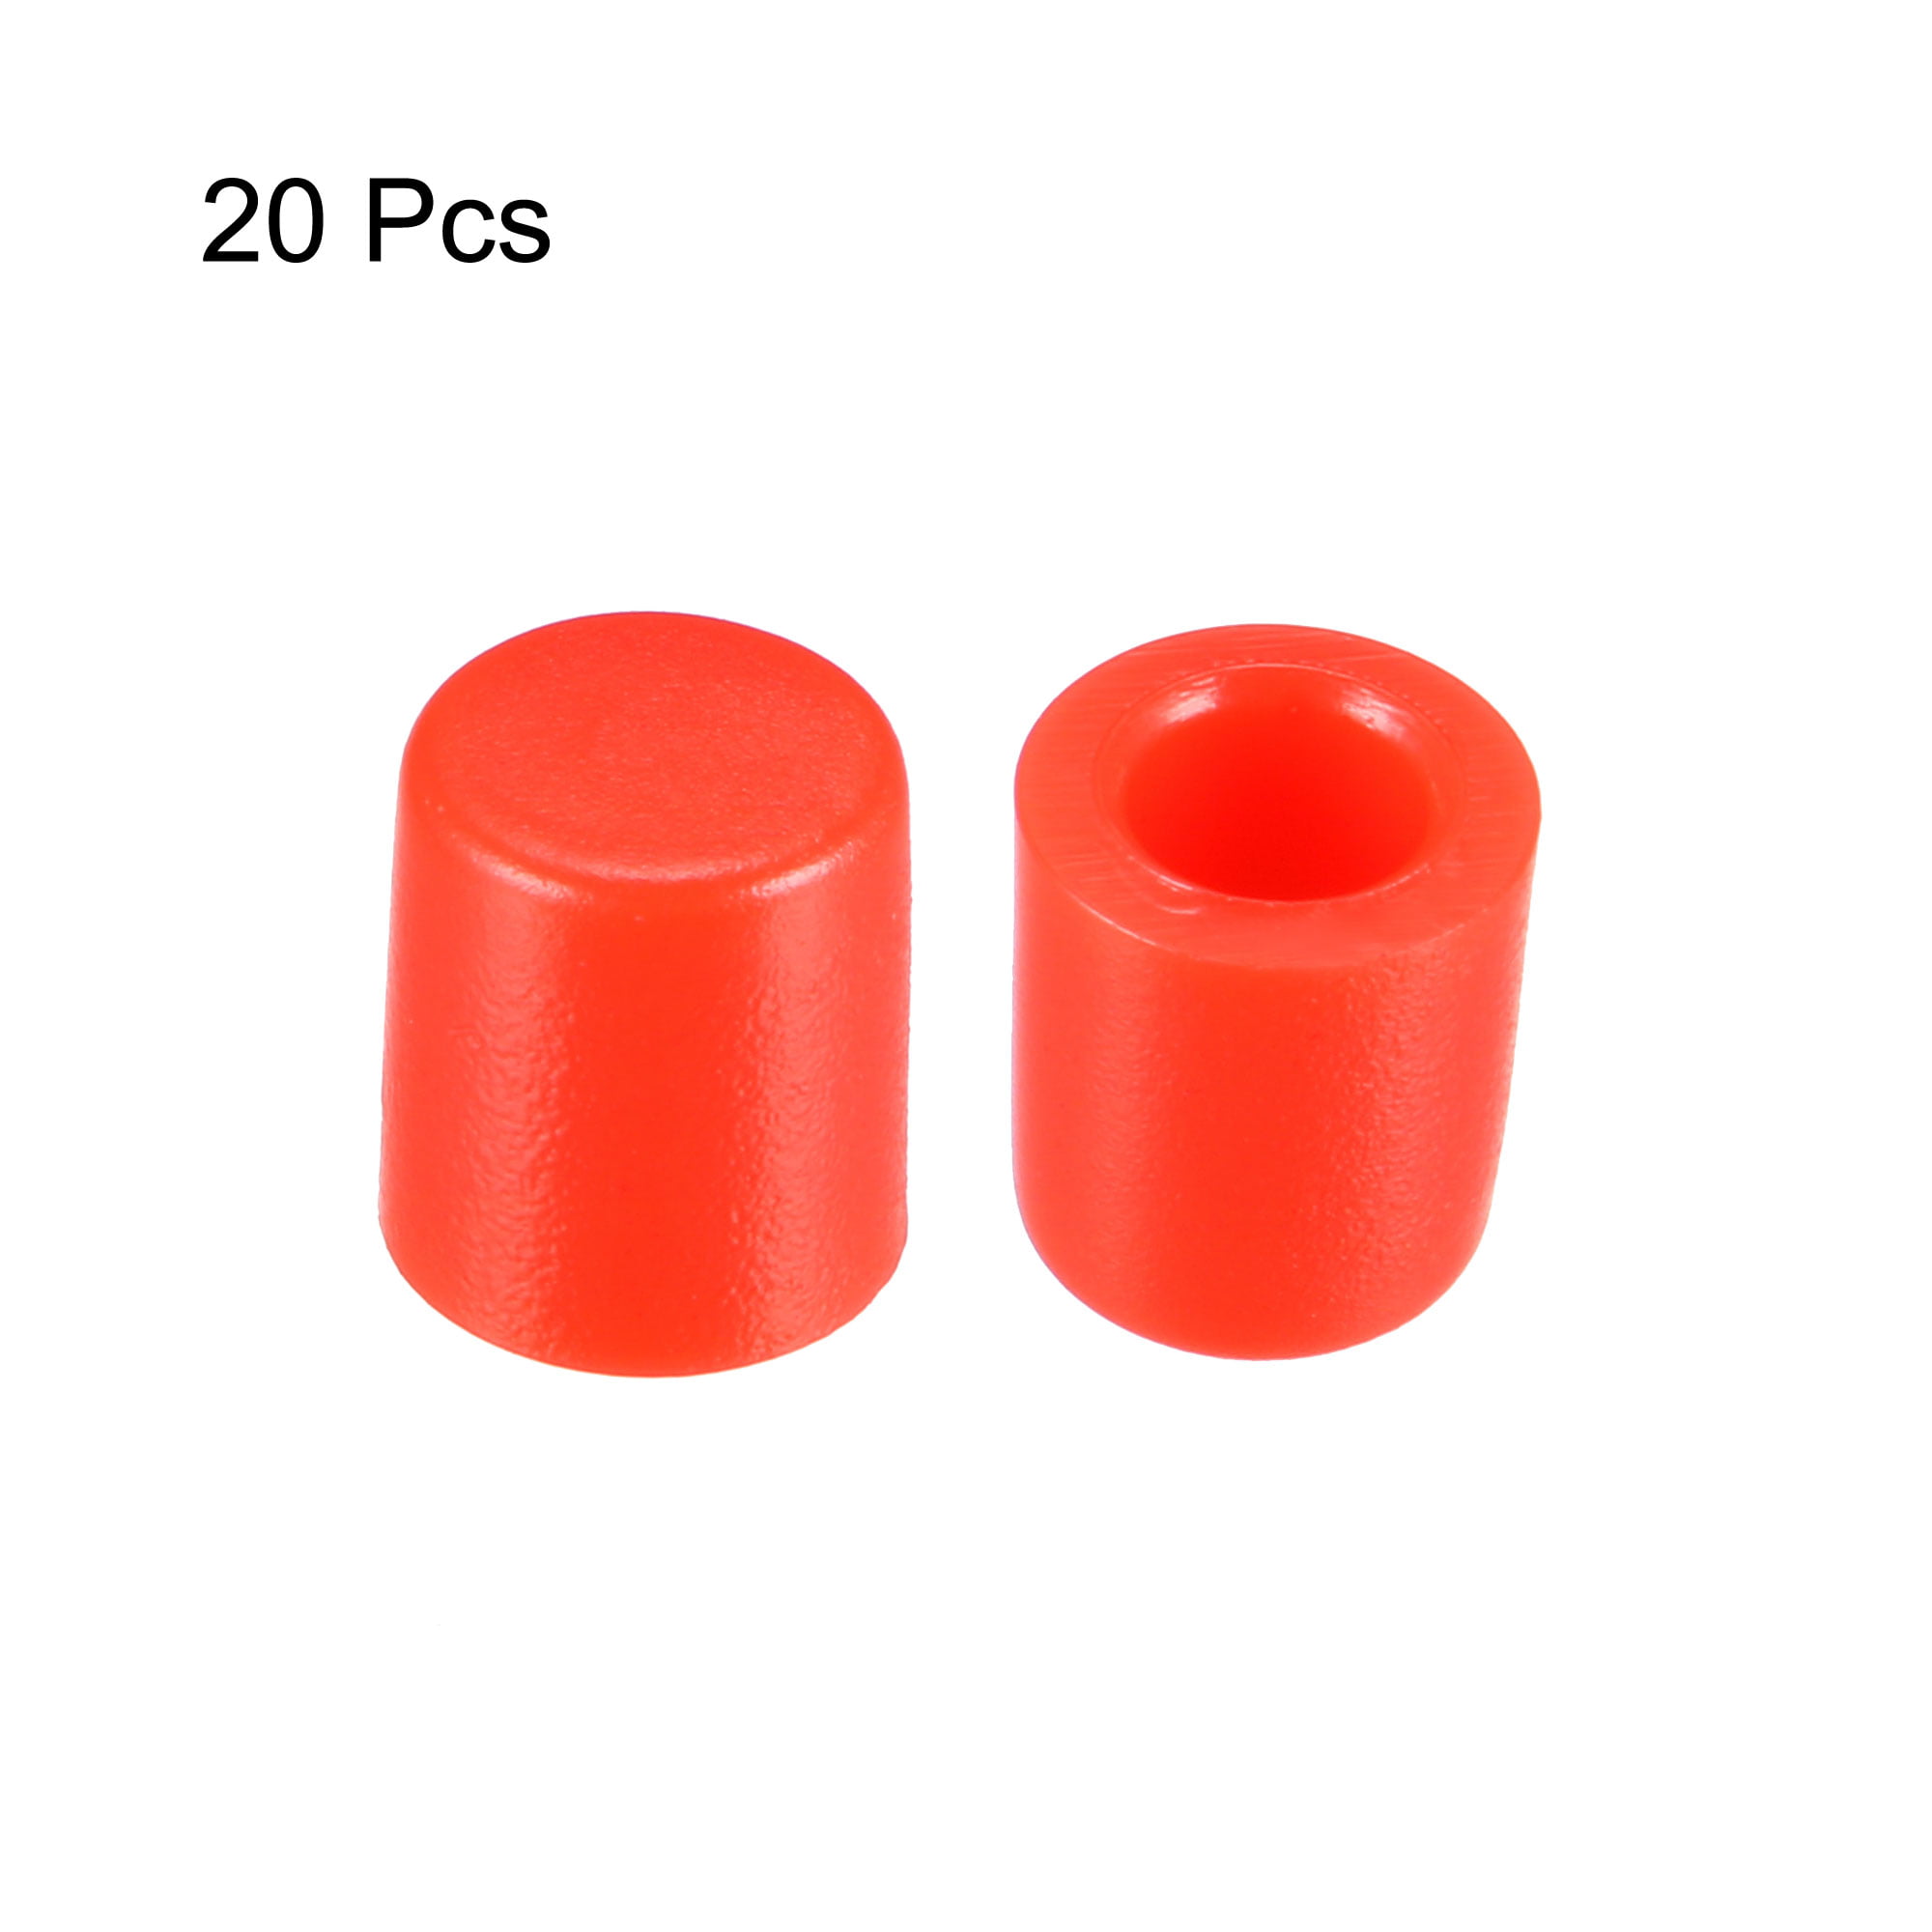 uxcell 20Pcs Plastic 9.3x5.6mm Pushbutton Tactile Switch Caps Cover Keycaps Red for 6x6x7.3mm Tact Switch 